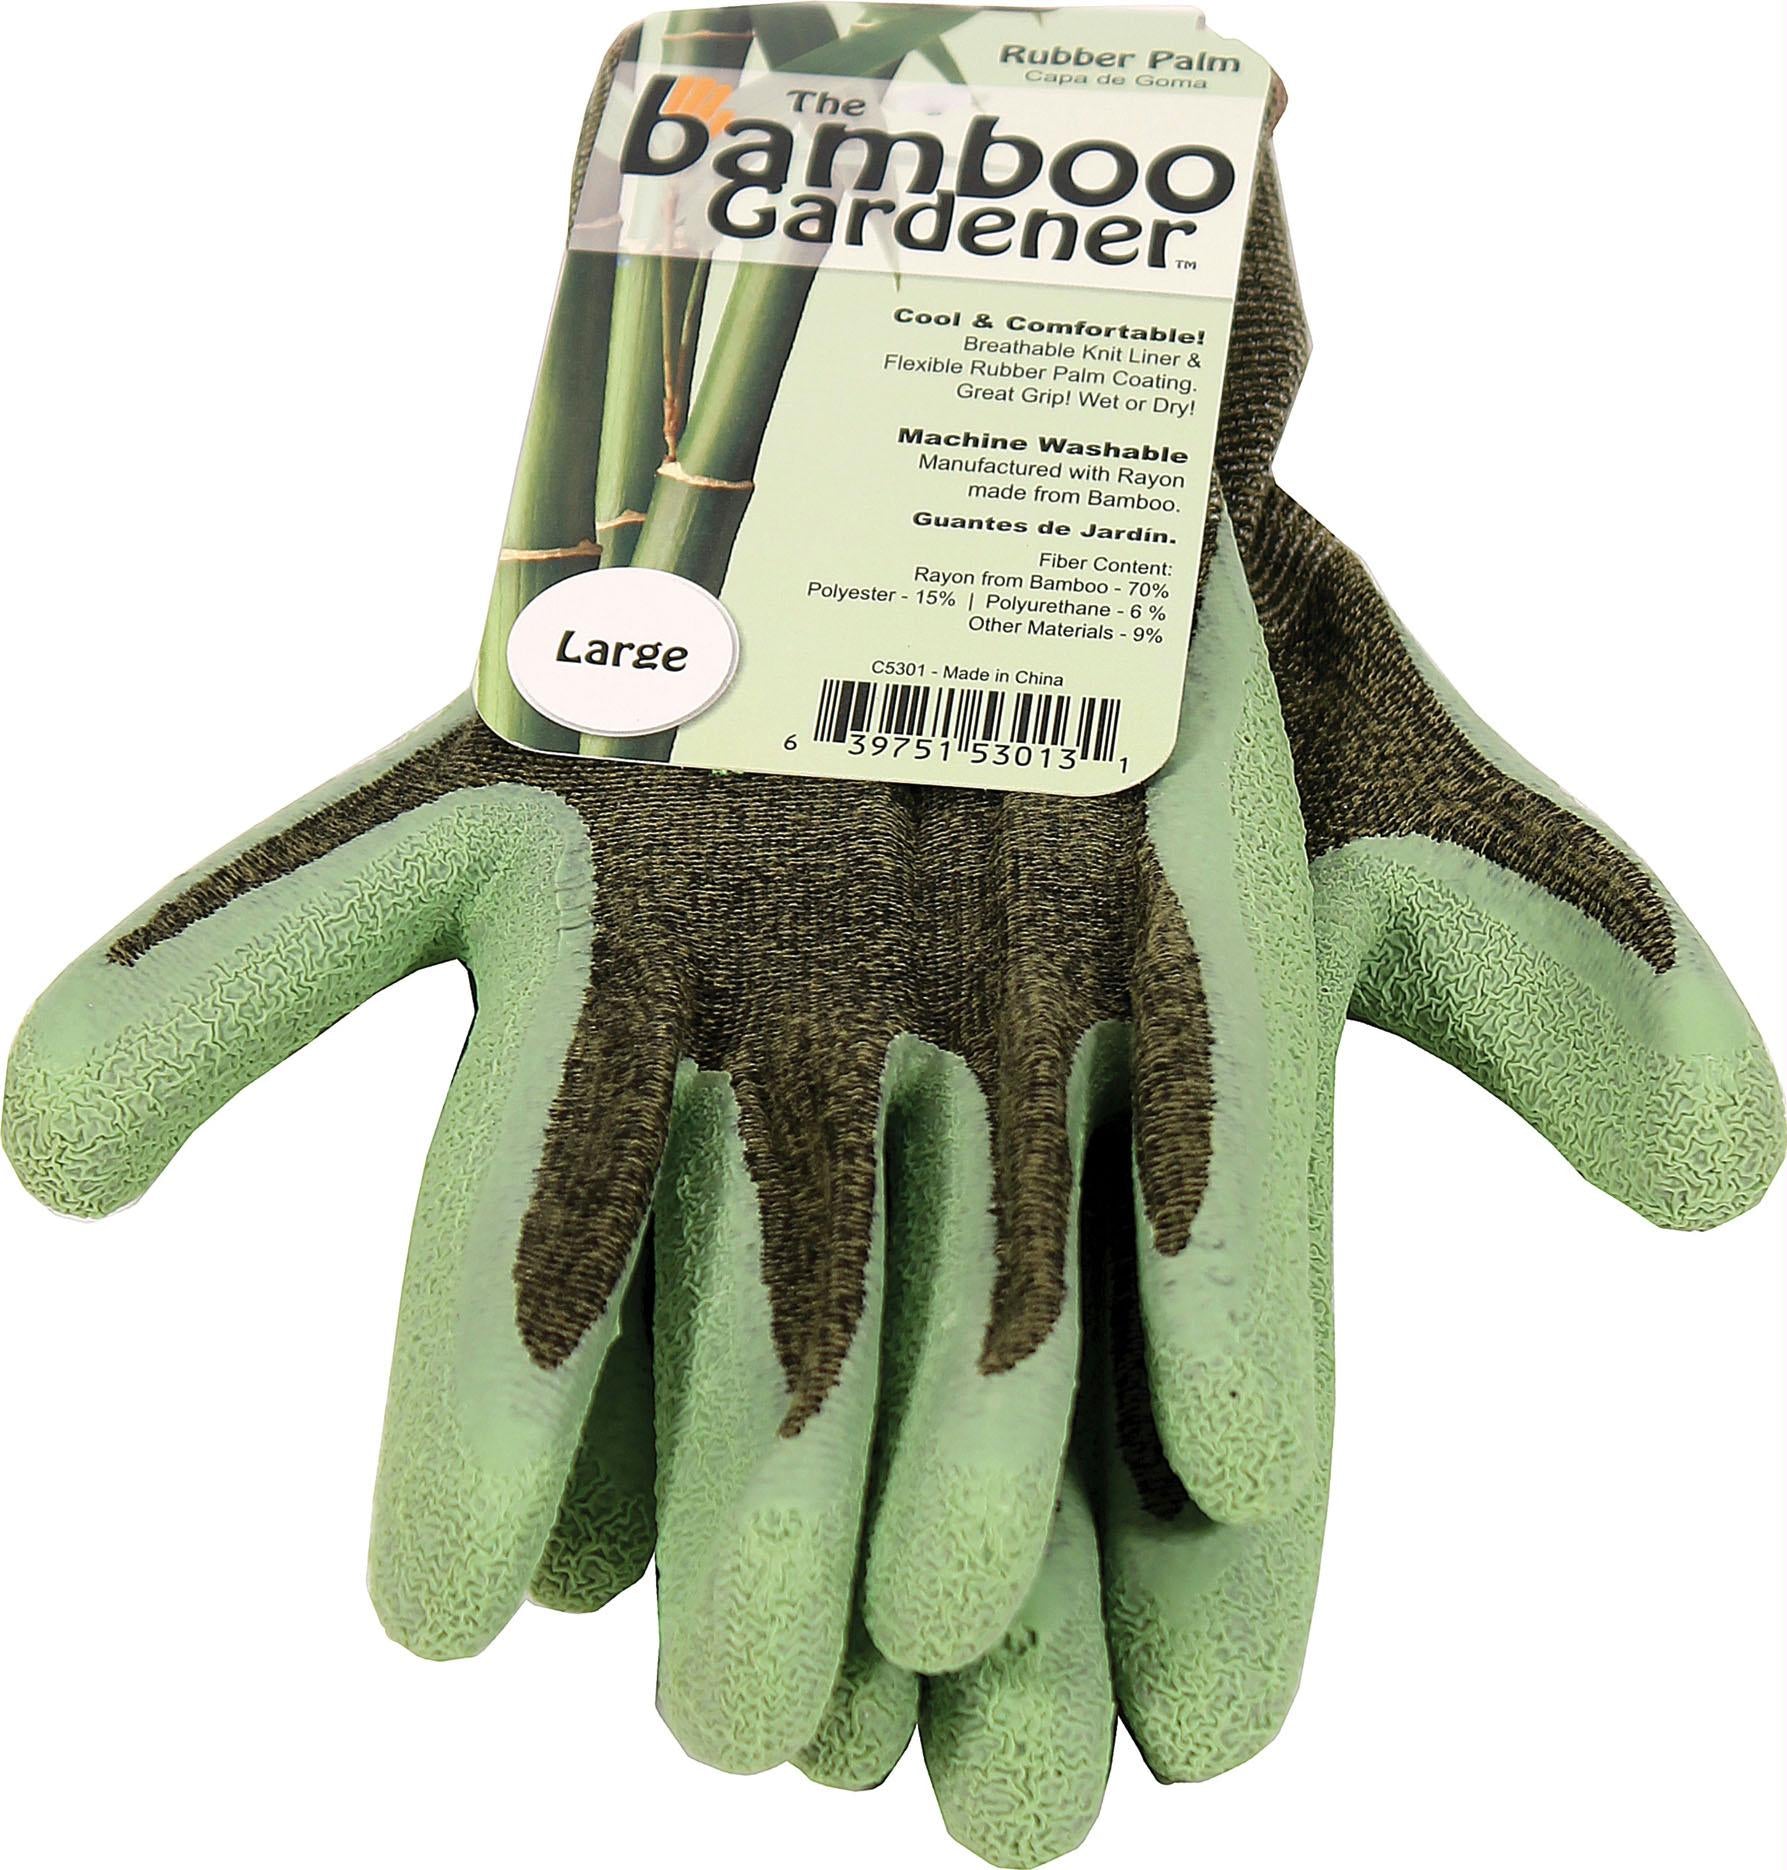 The Bamboo Gardener Rubber Palm Gloves - aomega-products